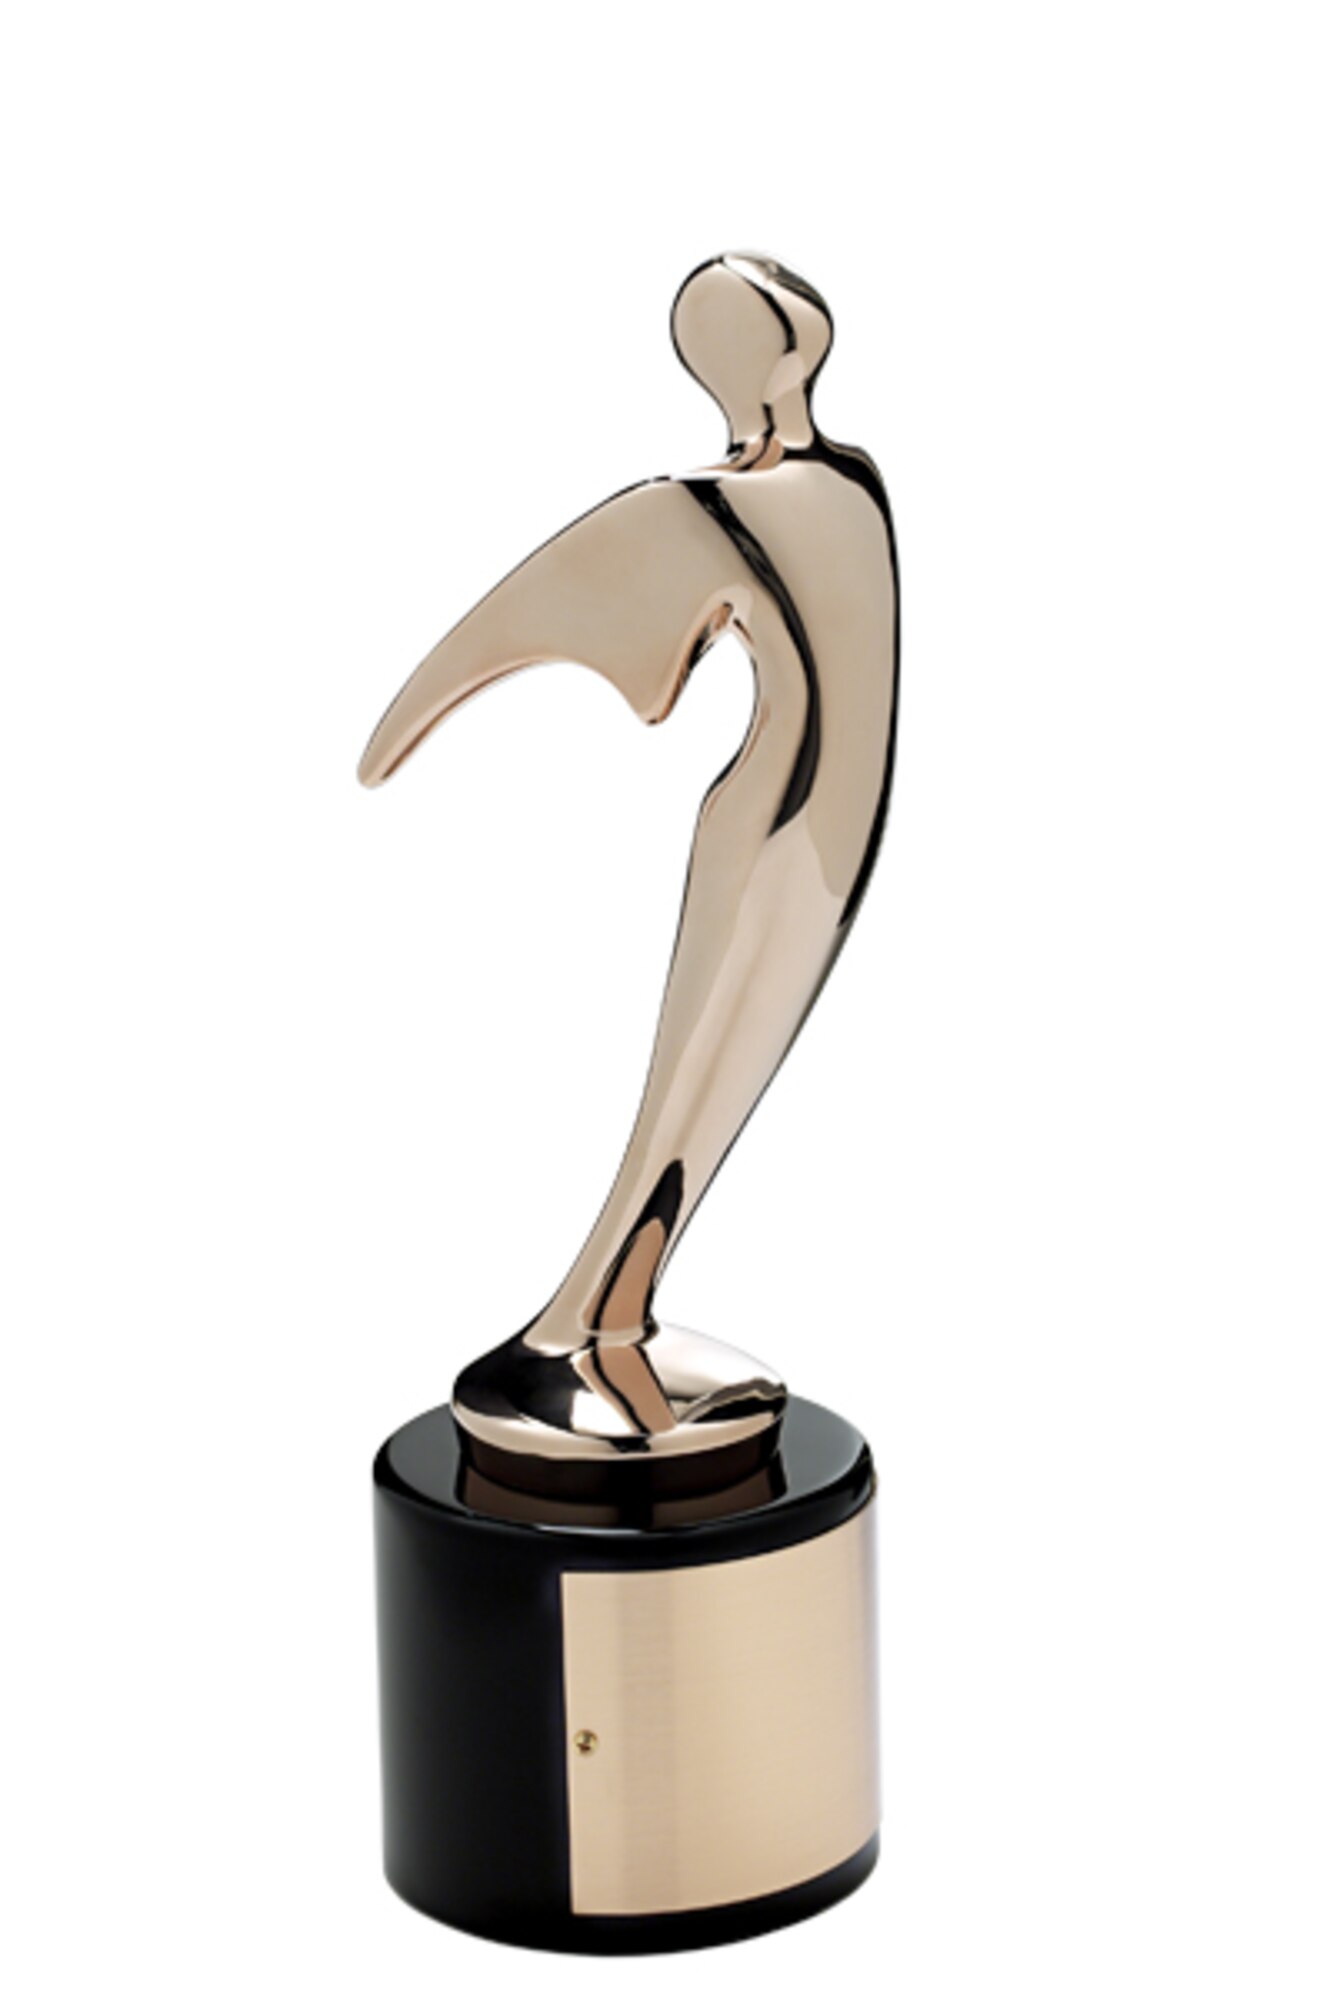 The Air Force Center of Excellence for Medical Multimedia (CEMM) was the recipient of a Bronze Telly award for their Pregnancy A to Z and Wingman Online websites during the 35th Annual Telly Awards recently. (Courtesy Photo)